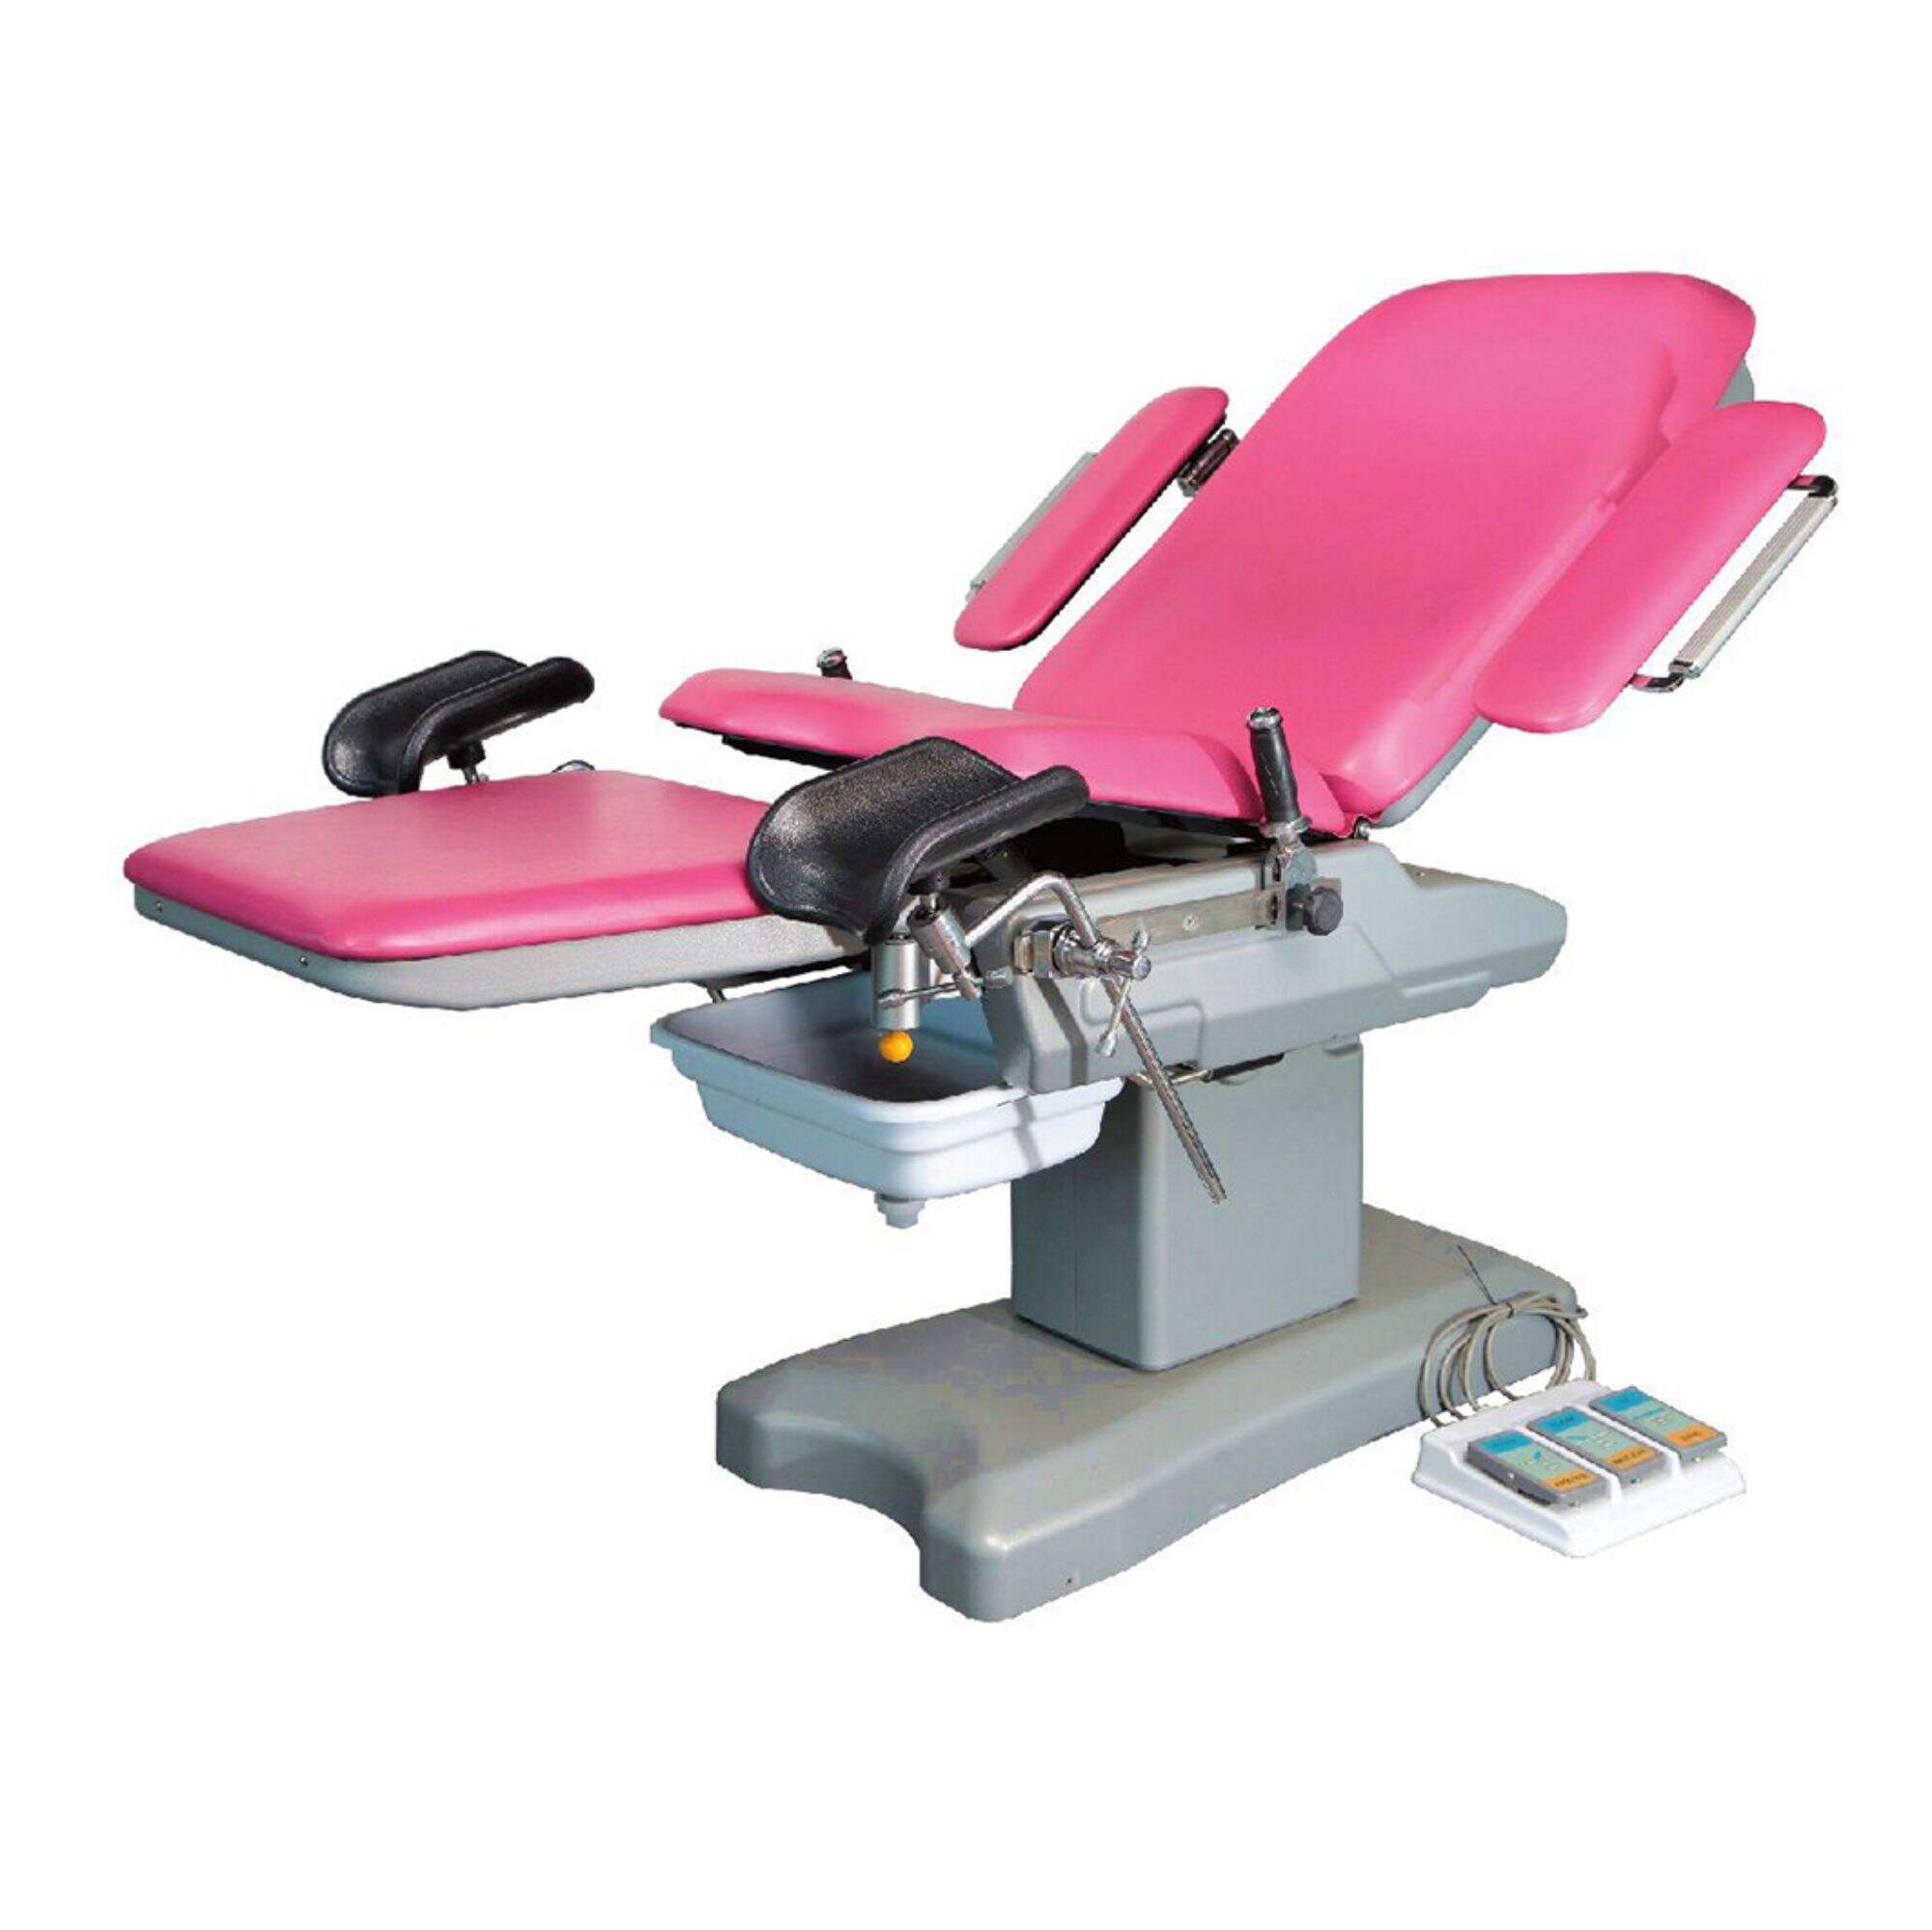 YFDC-LT03(II) Electric Gynecology & Obstetric Table